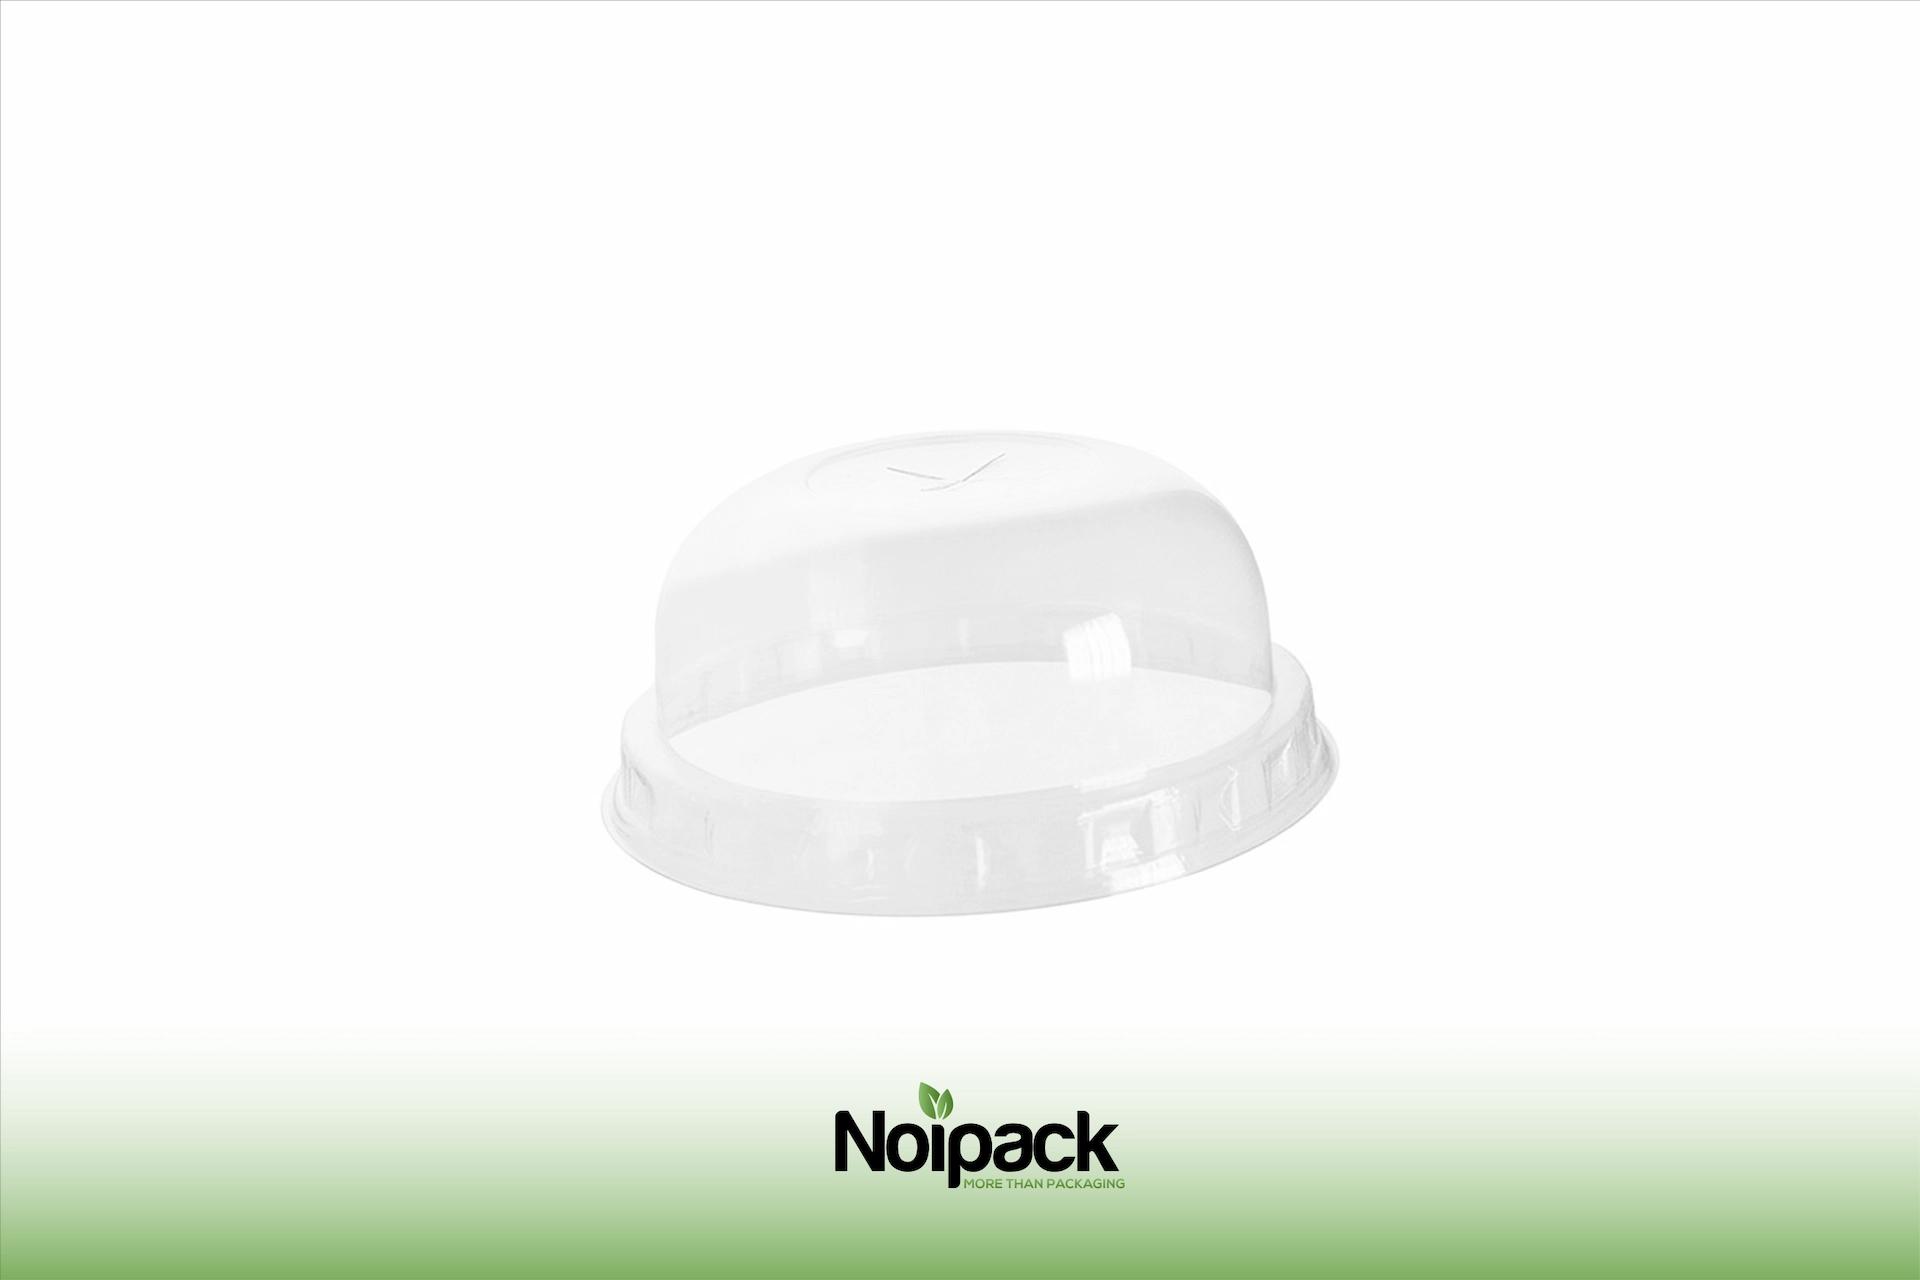 Noipack dome lid 500ml PET